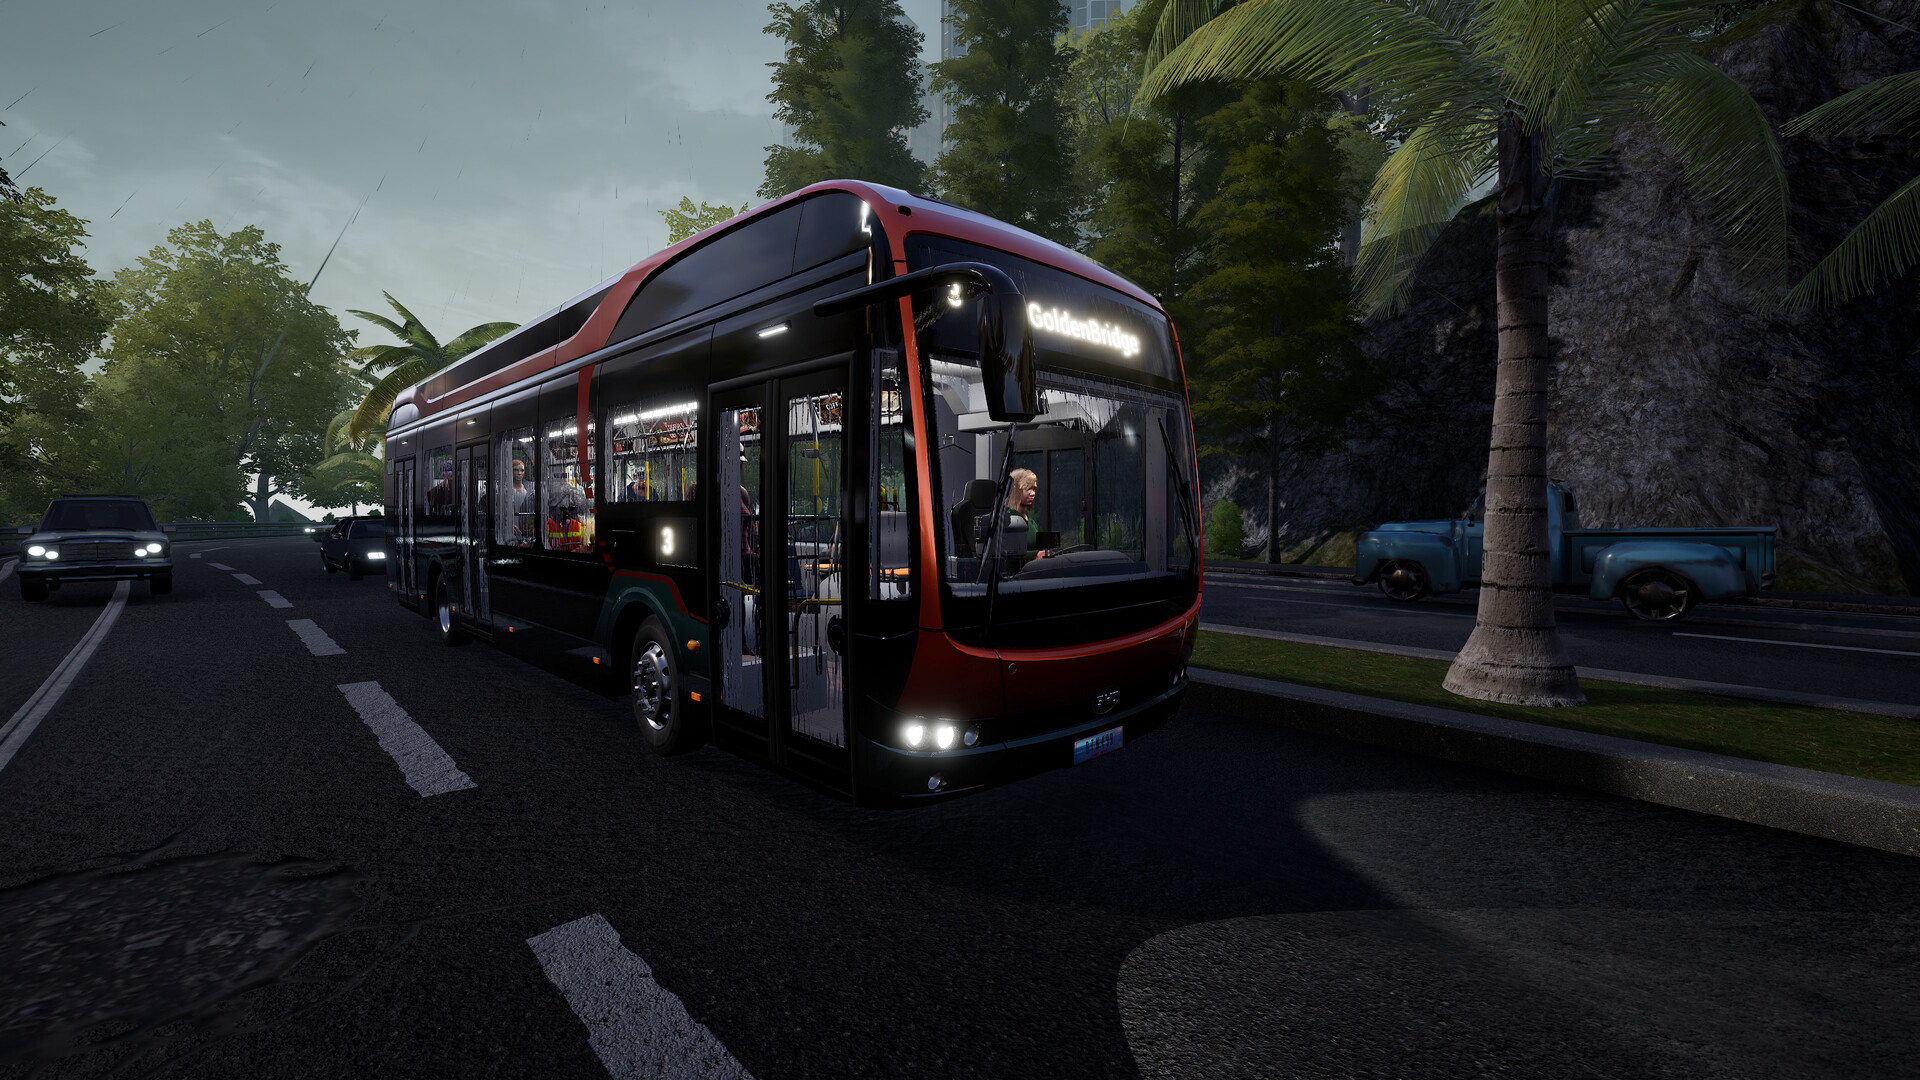 Bus Simulator 21 Next Stop: Gold Edition Steam Account